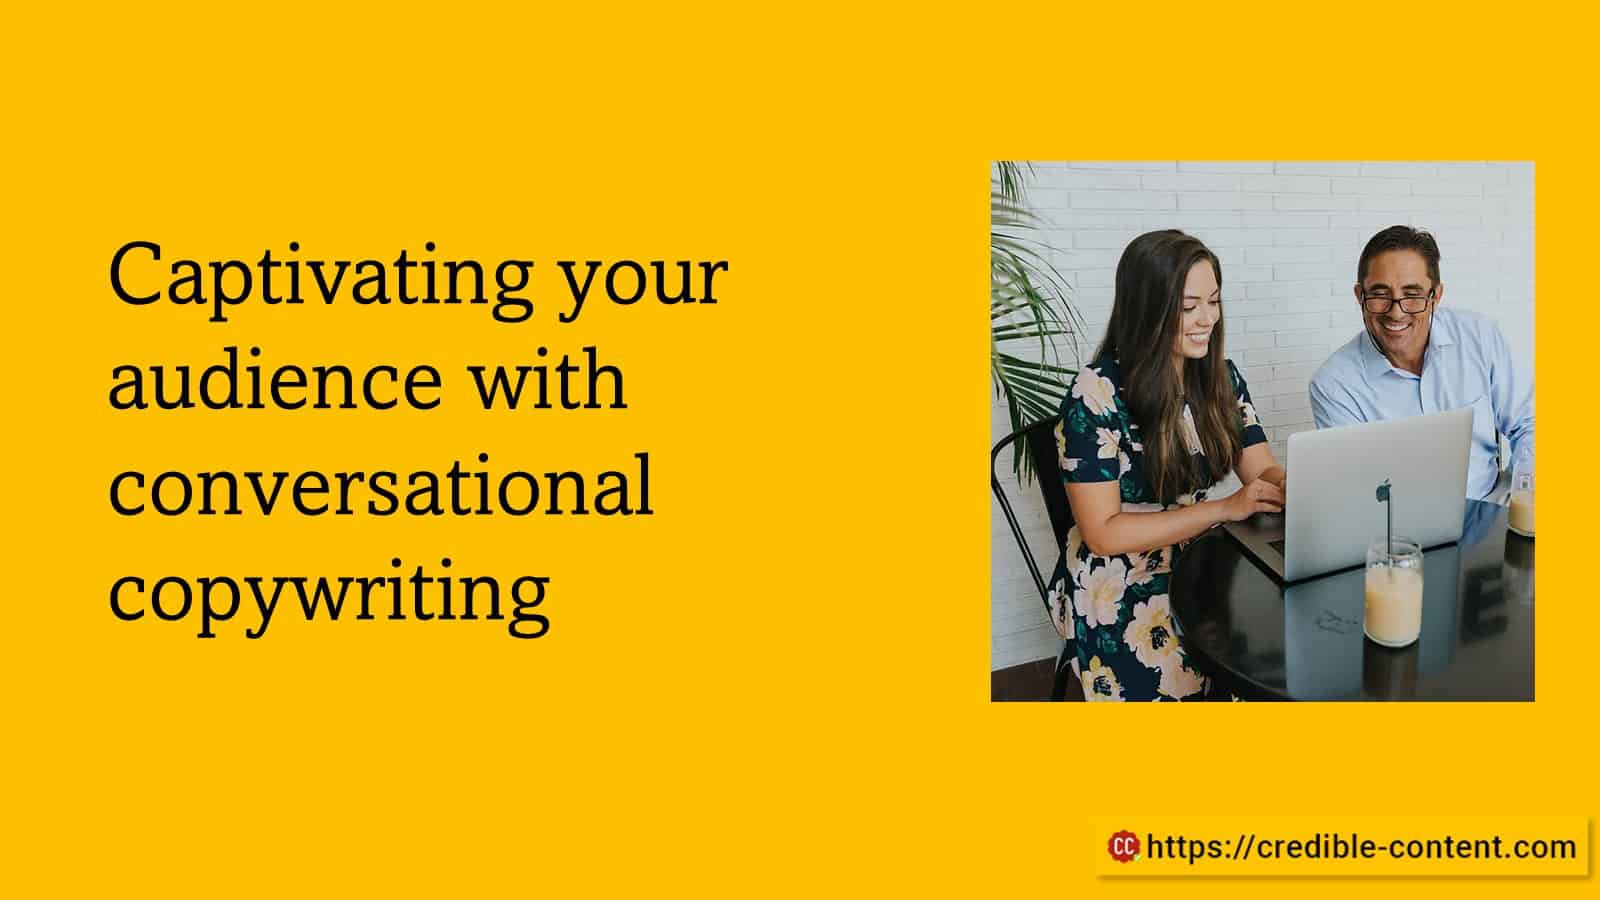 Captivating your audience with conversational copywriting